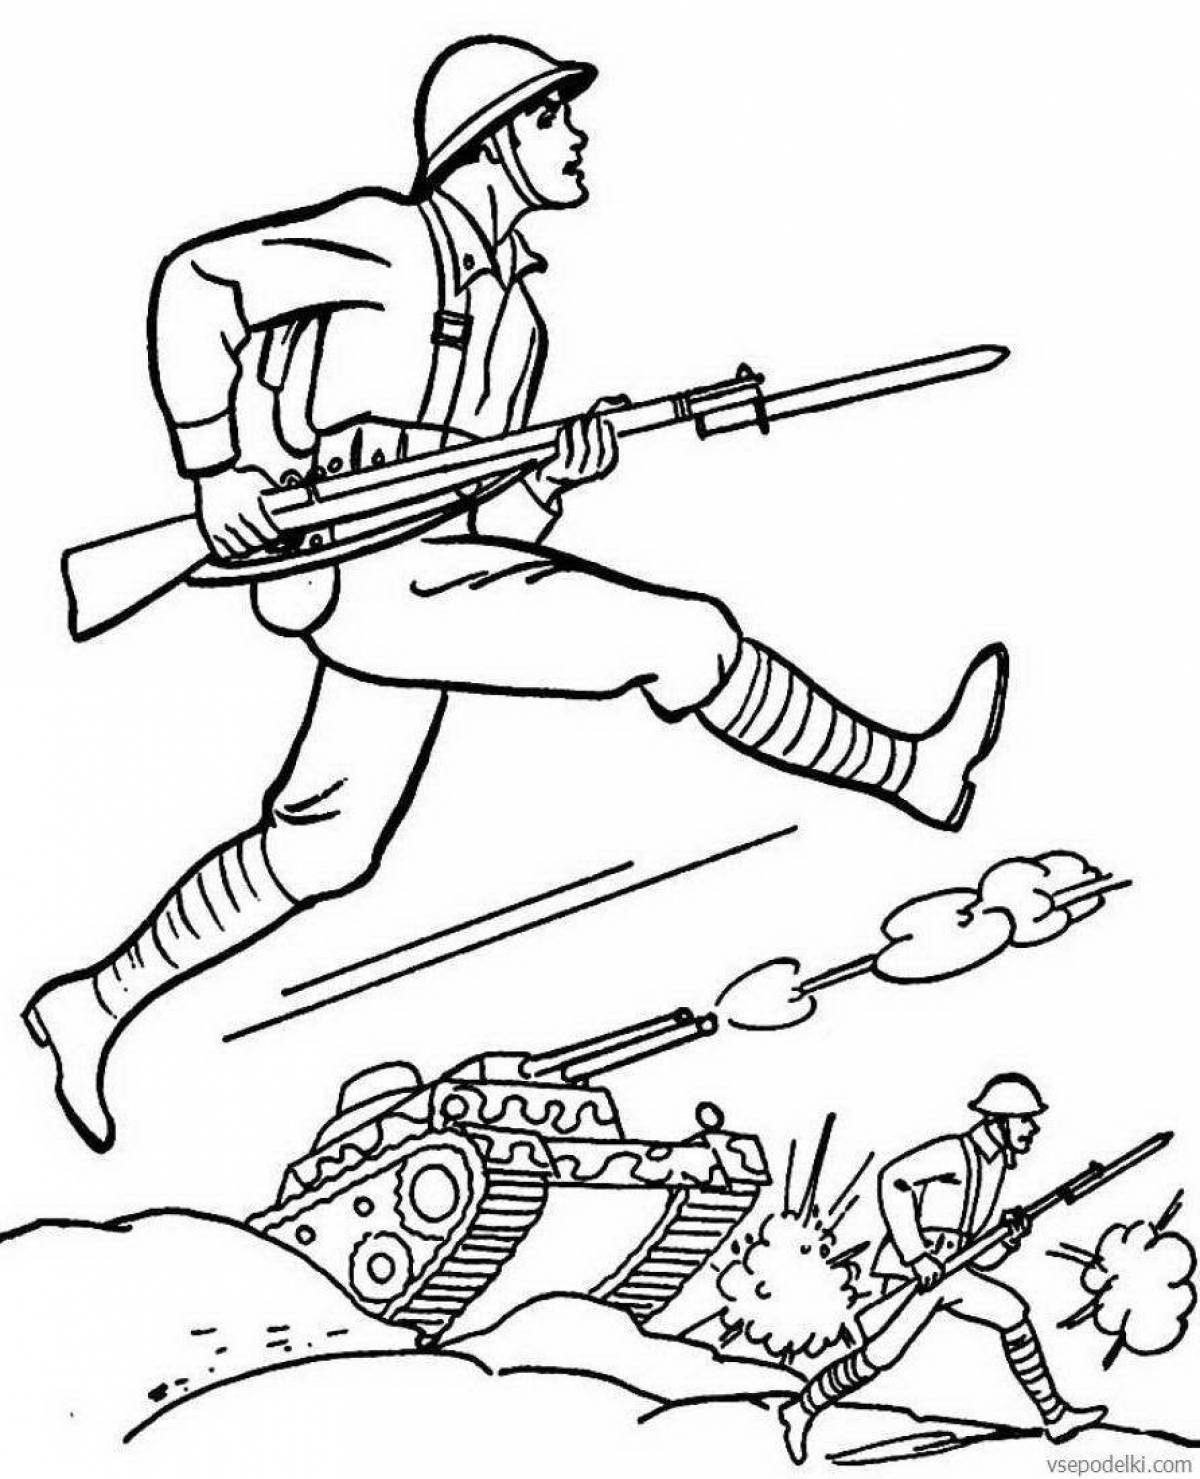 Creative Russian army coloring book for kids